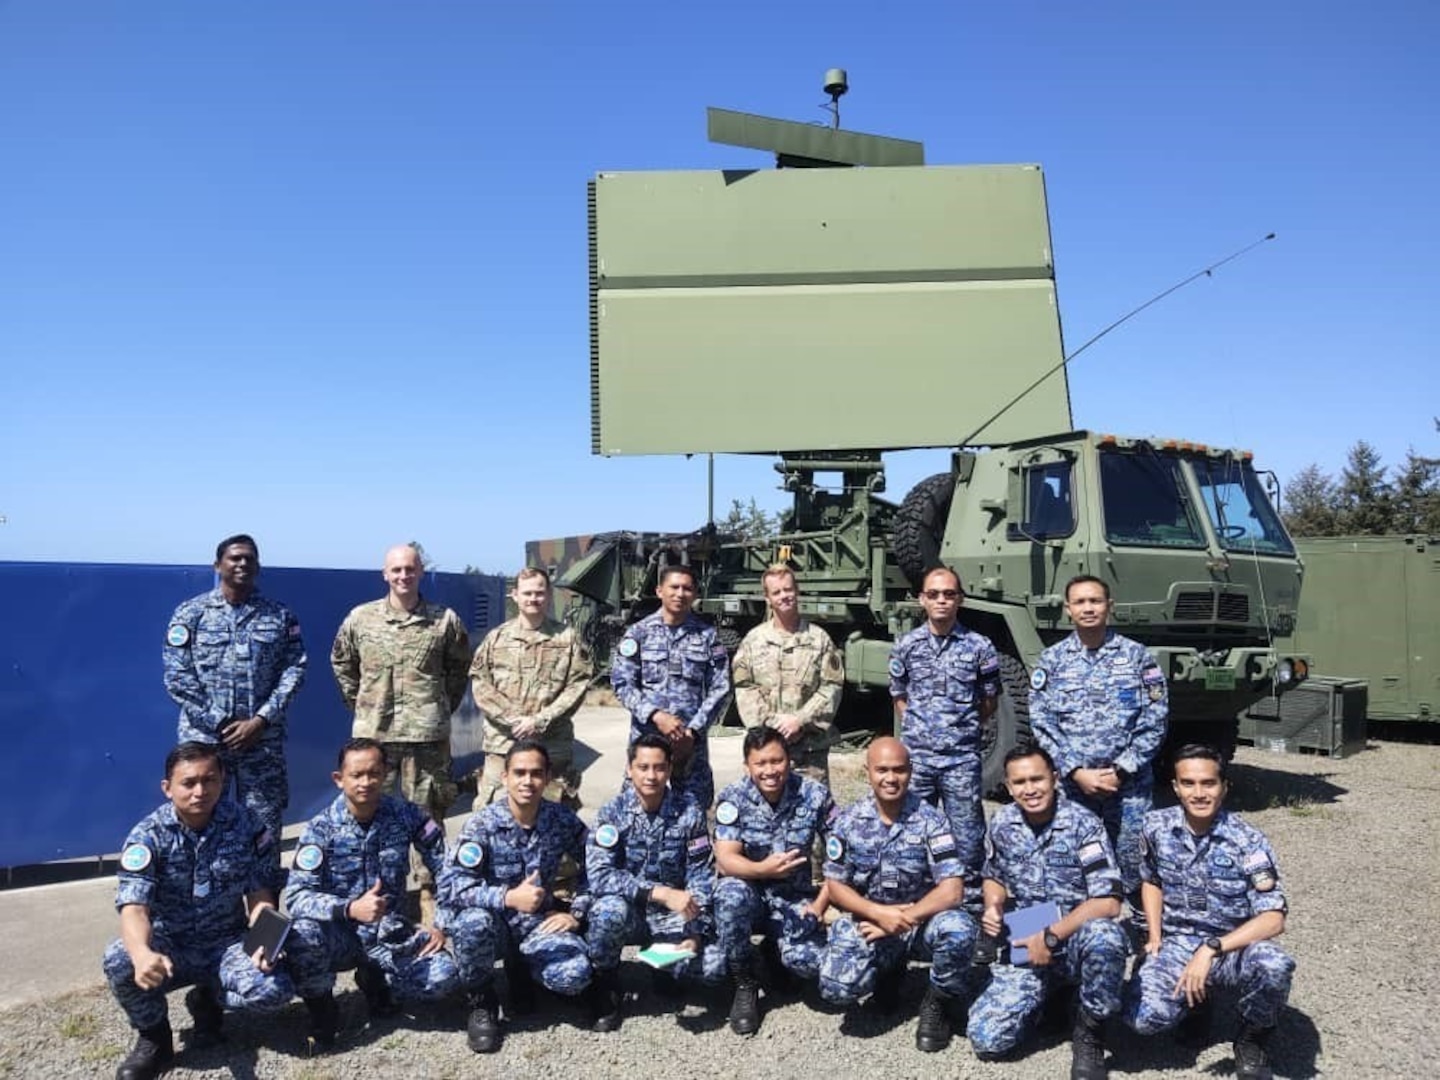 The Western Air Defense Sector hosts 12 members of the Royal Malaysian Air Force as part of a subject matter exchange entailing hands-on training at a radar site at Camp Rilea, Oregon, Aug. 27, 2021. Washington and Malaysia have been partner countries in the National Guard State Partnership Program since August 2017.